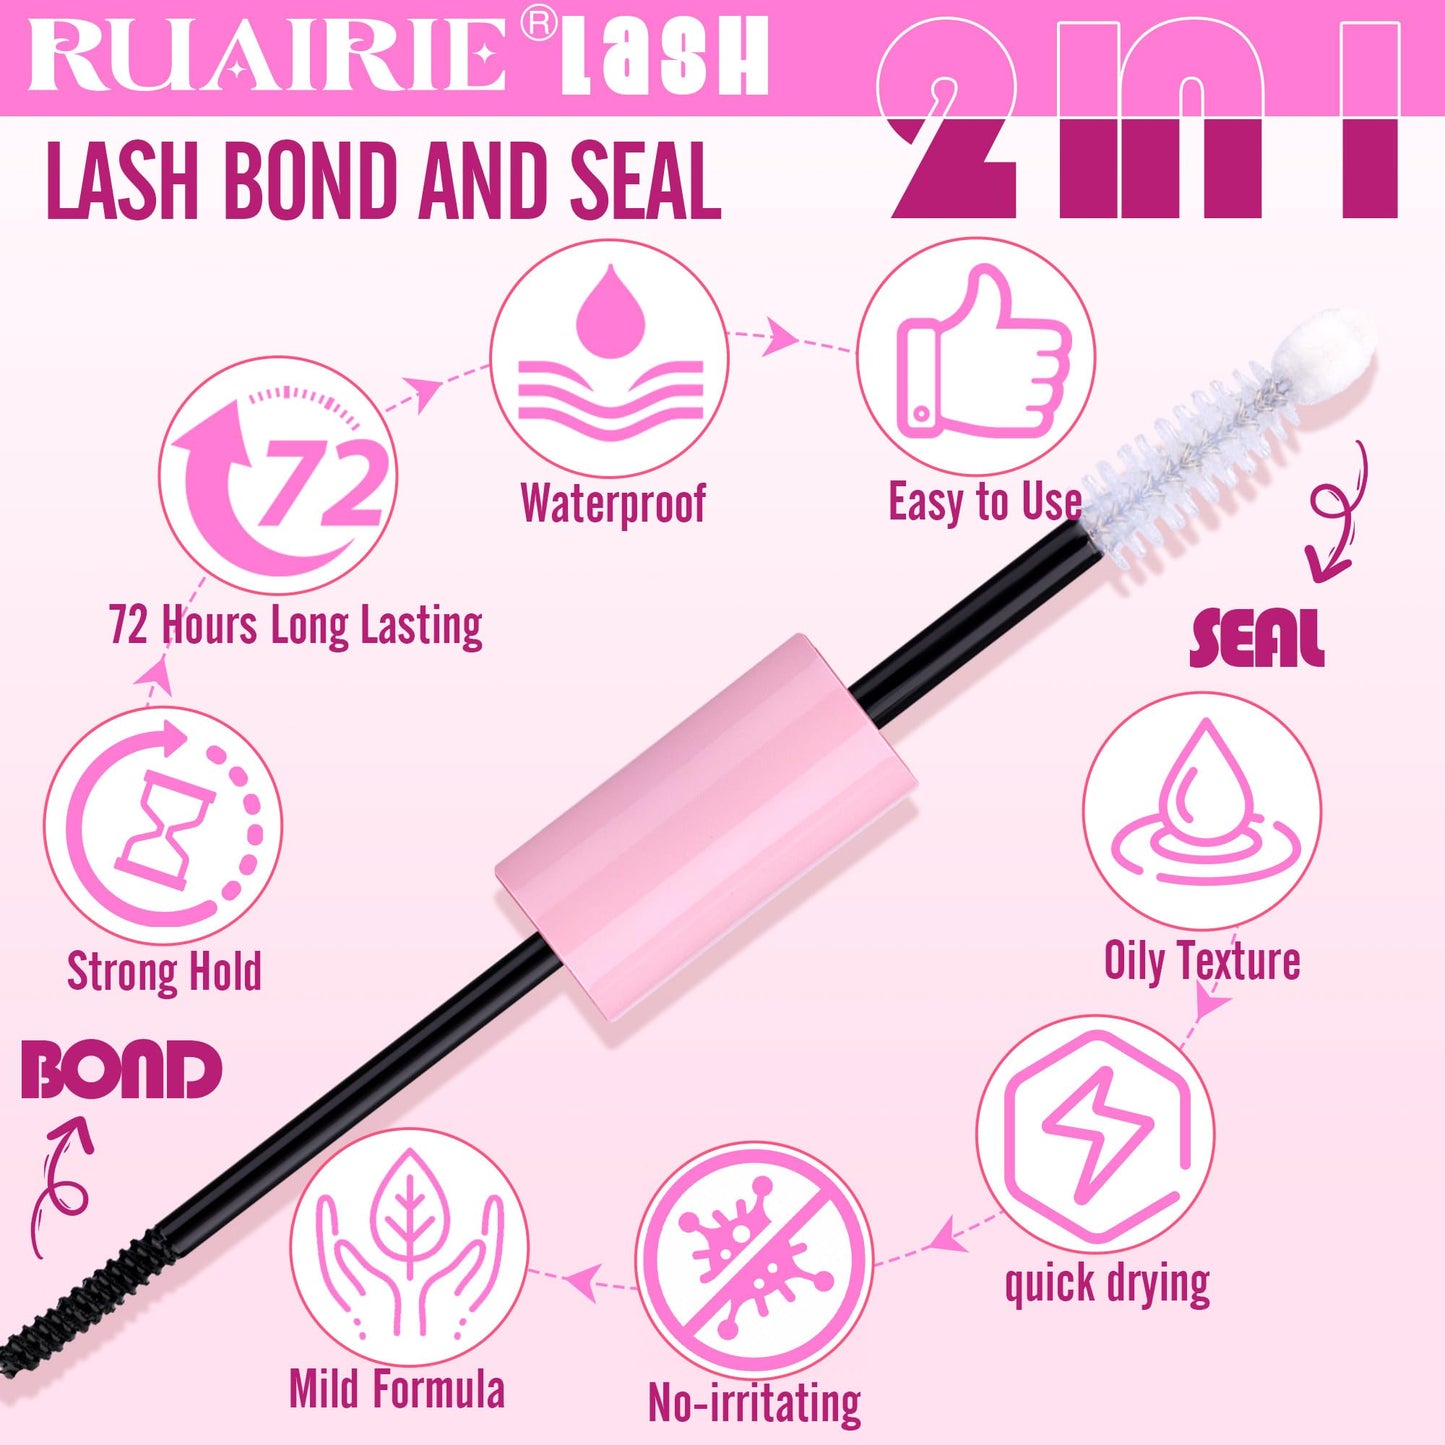 Bond and Seal Lash Glue Strong Hold Lash Cluster Glue 2 in 1 Lash Bond and Seal Waterproof Long Lasting Cluster Lash Glue by Ruairie